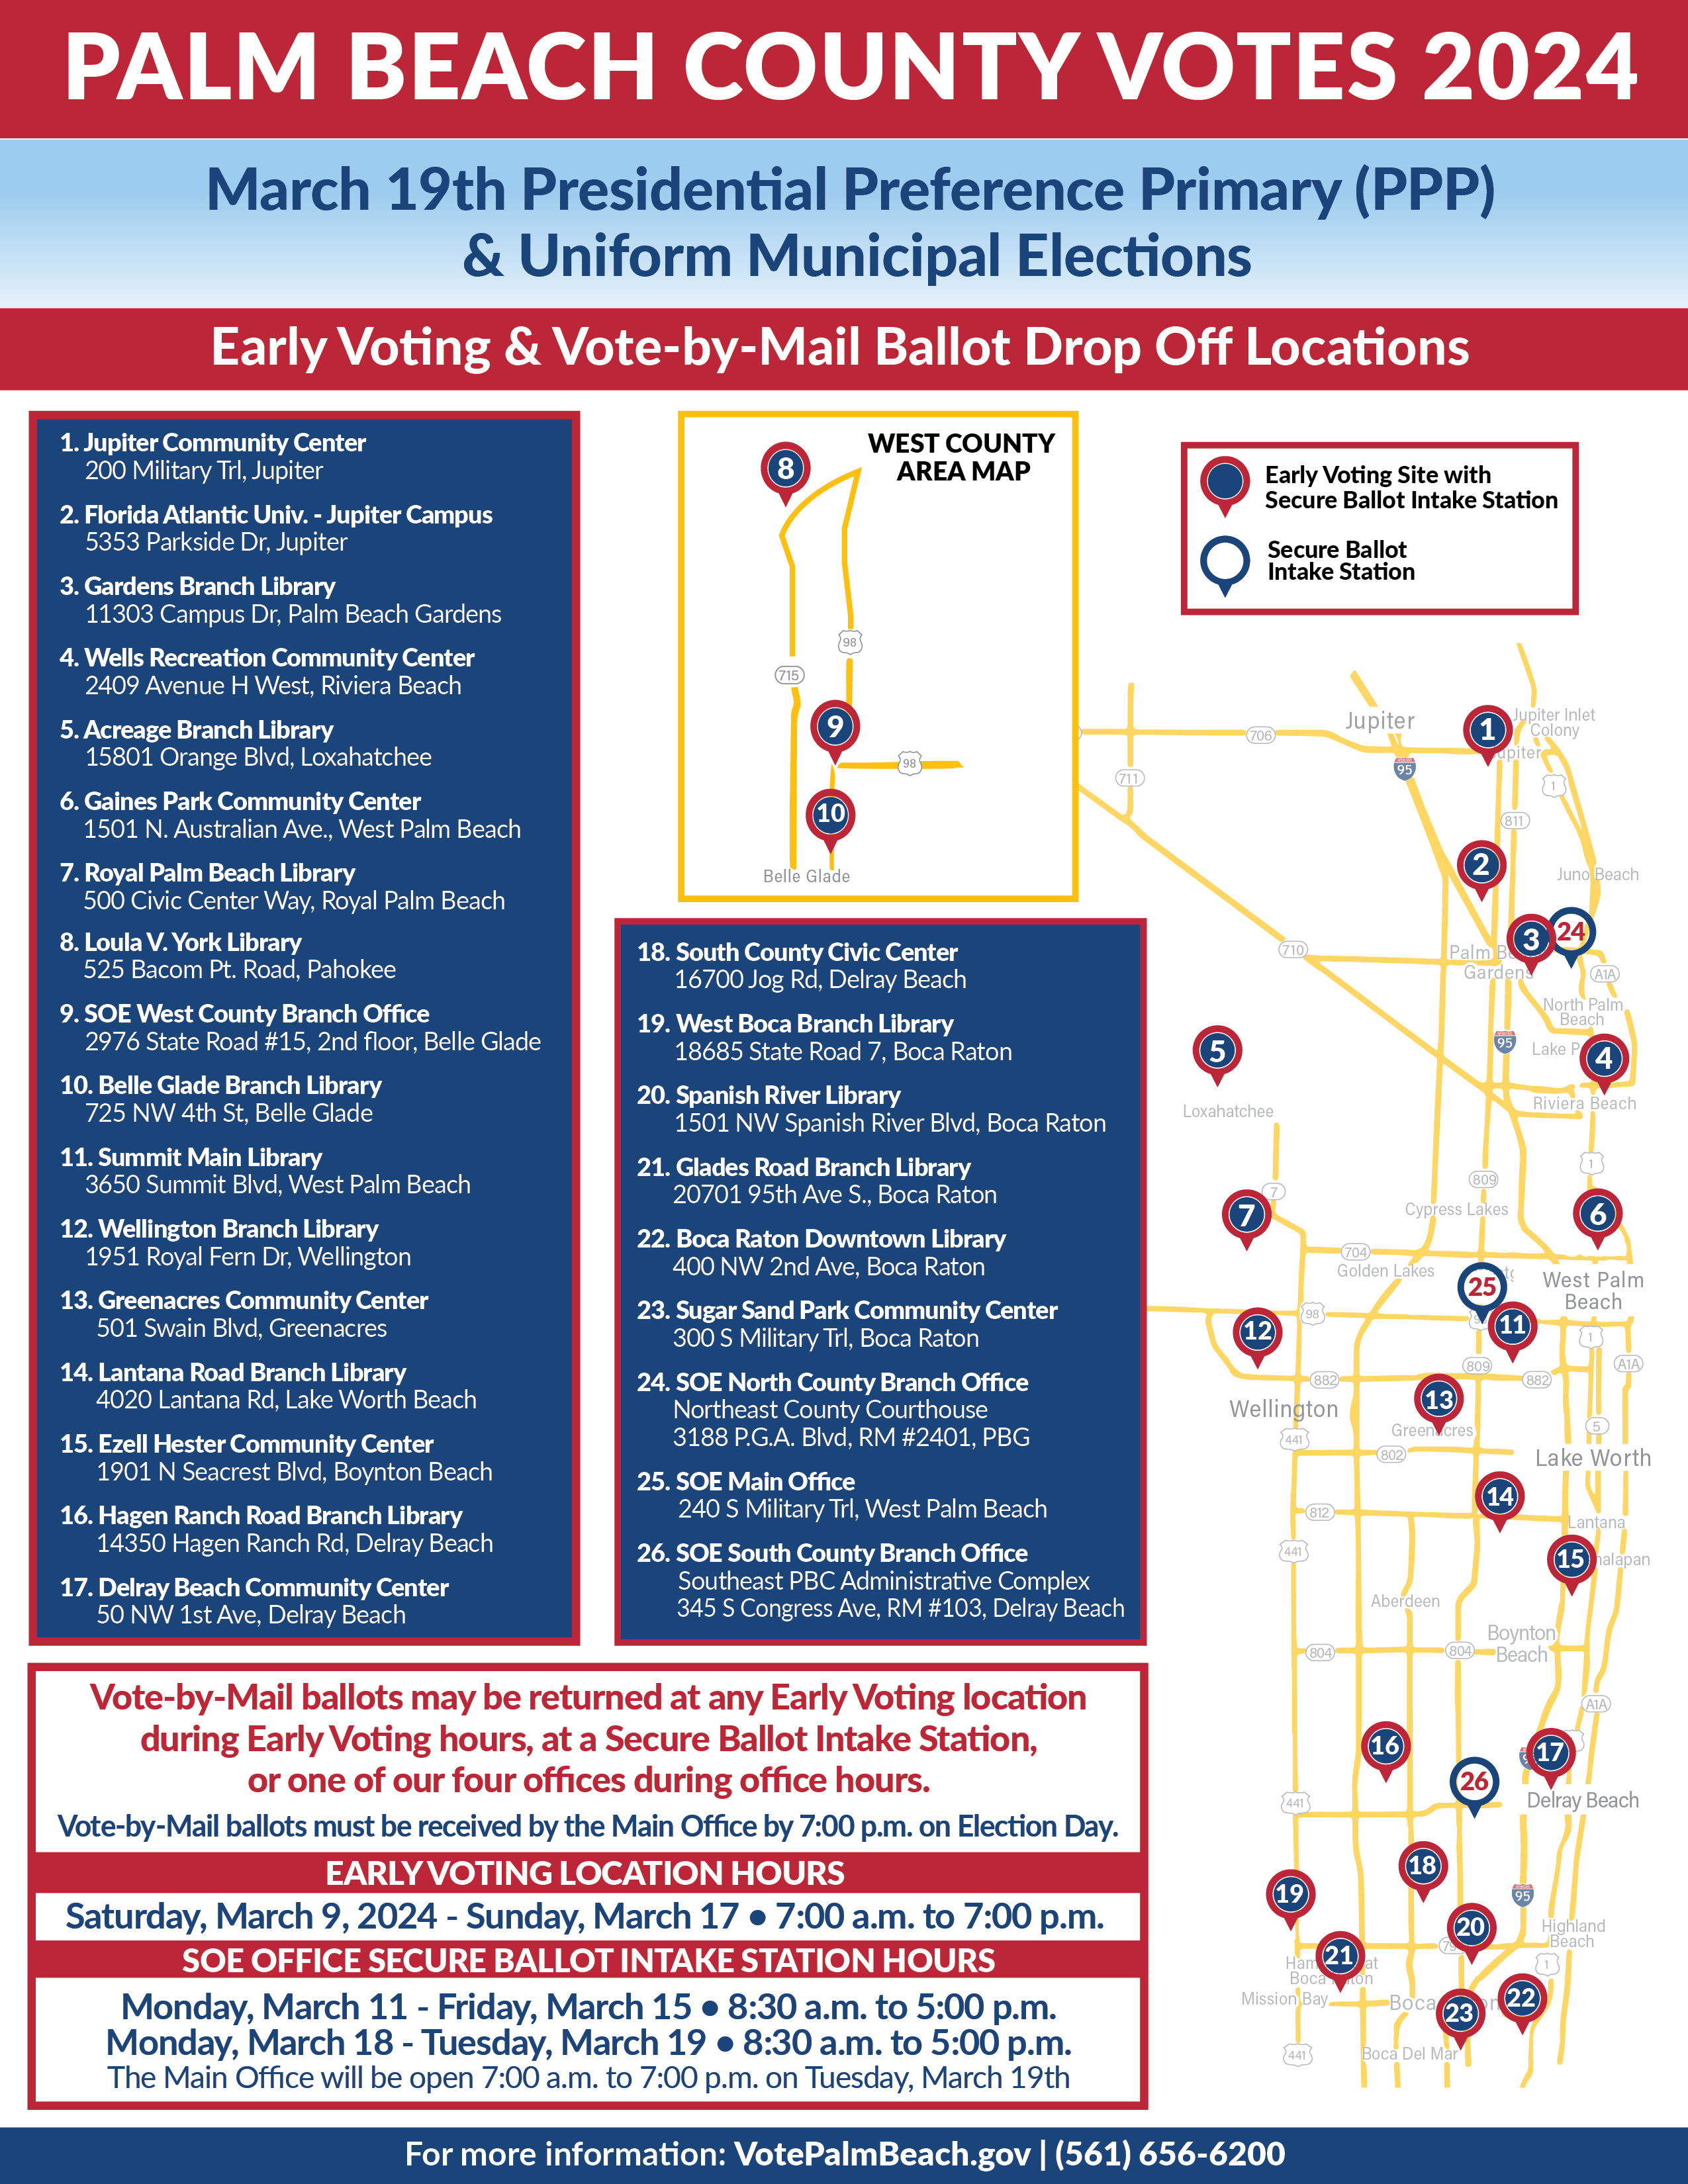 Click on the image to download a PDF flyer of the Early Voting and Vote-by-Mail drop off locations.